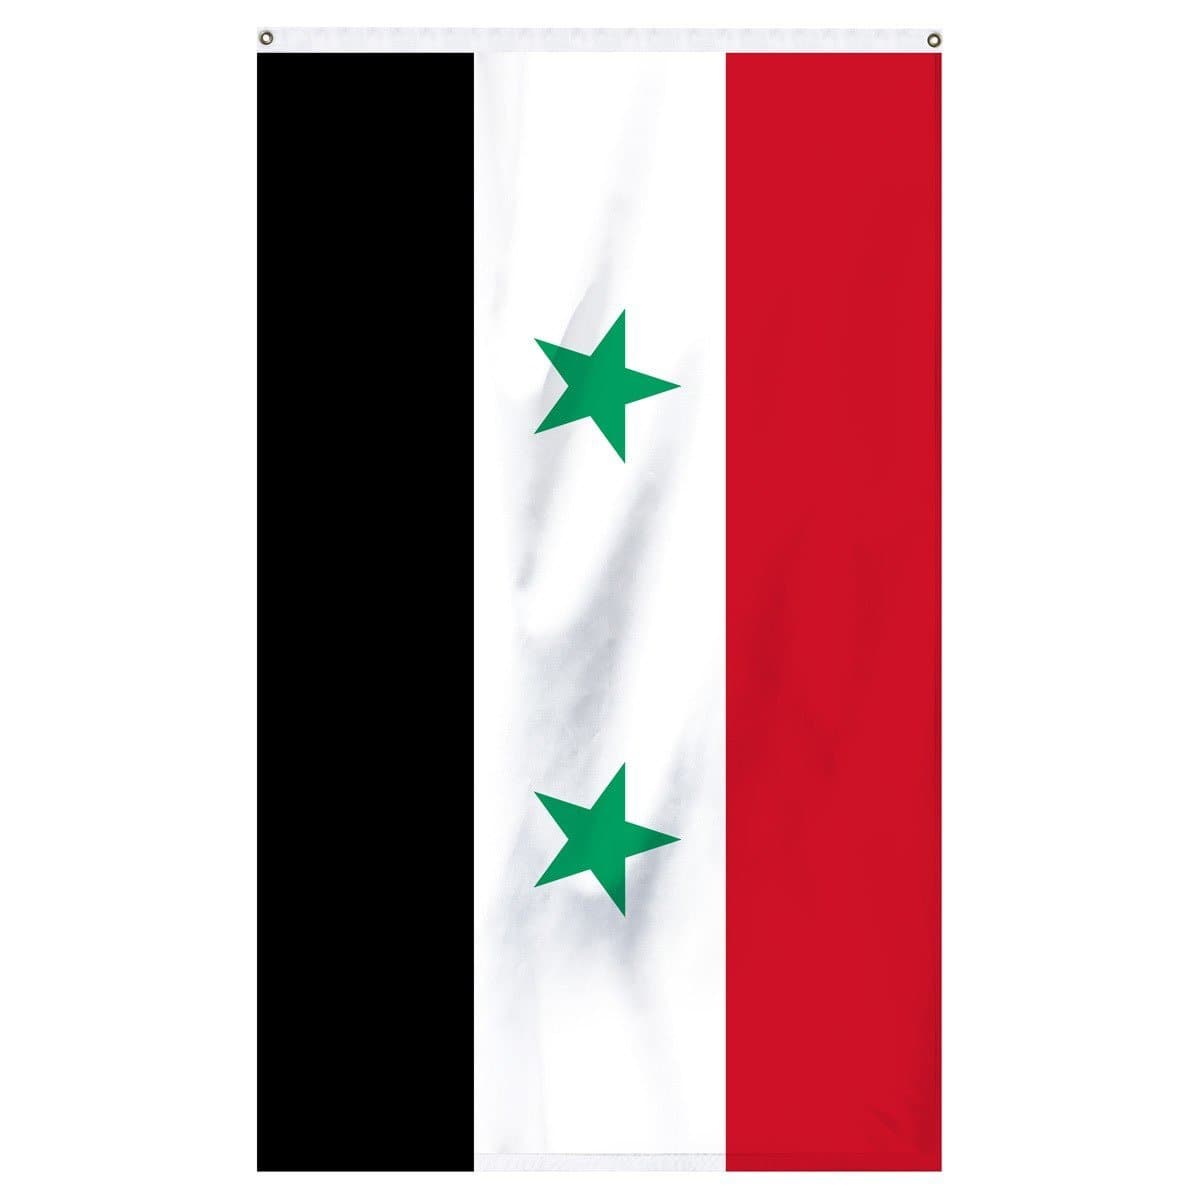 Syria National flag for sale to buy online from Atlantic Flag and Pole. Red, white, and black flag with two green stars in the middle.